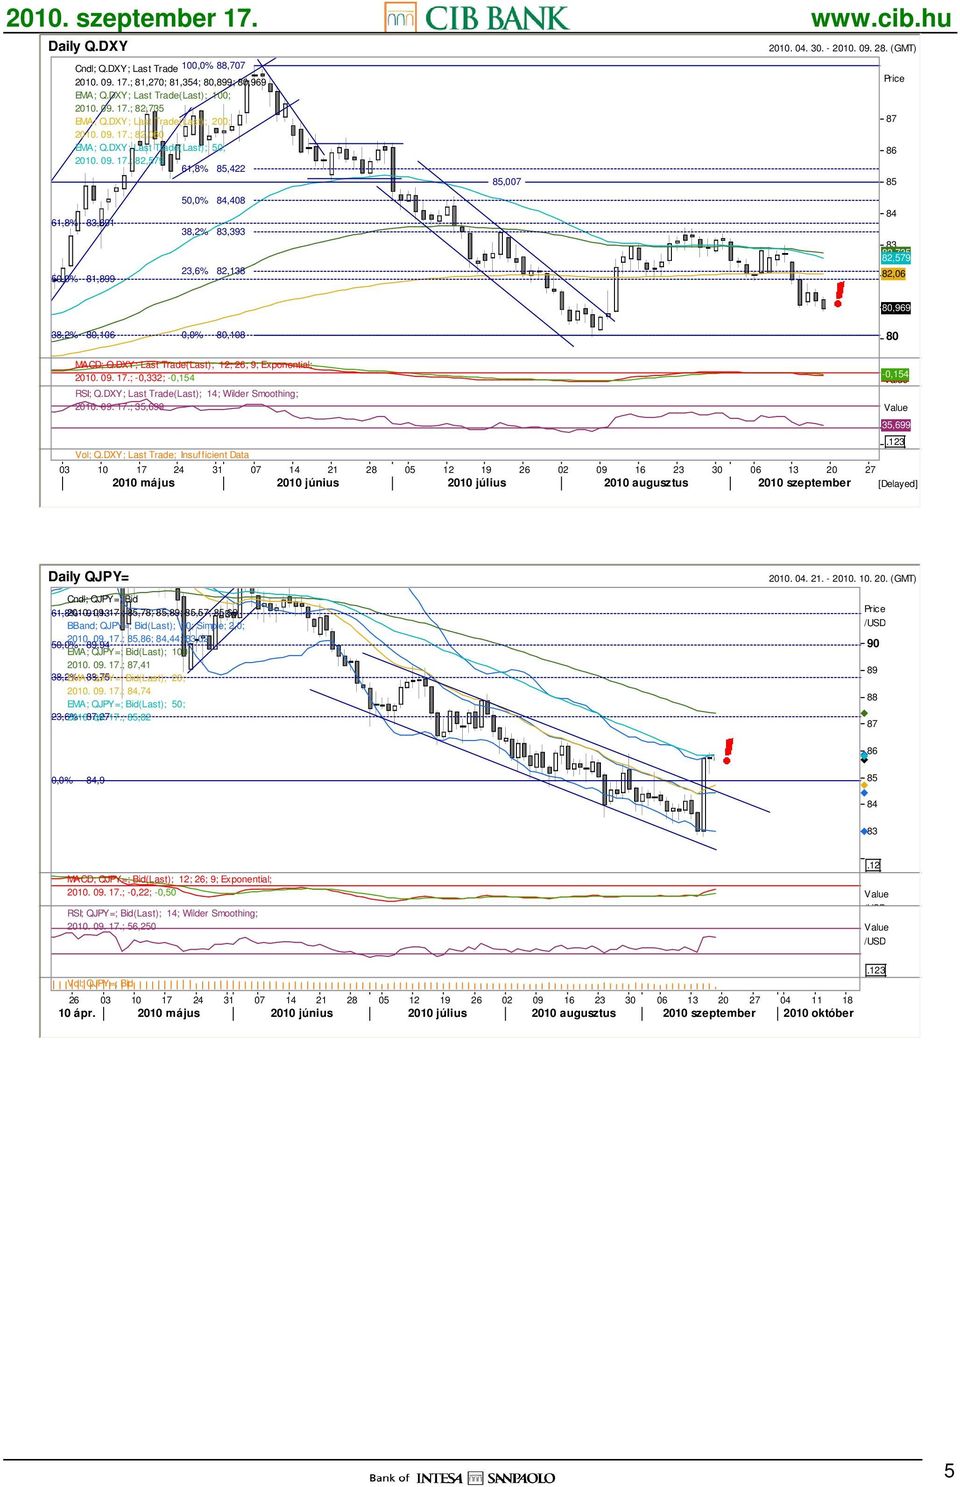 (GMT) Price 87 86 85 84 83 82,735 82,579 82,06 80,969 81 38,2% 80,106 0,0% 80,108 80 MACD; Q.DXY; Last Trade(Last); 12; 26; 9; Exponential; 2010. 09. 17.; -0,332; -0,154-0,332-0,154 Value RSI; Q.